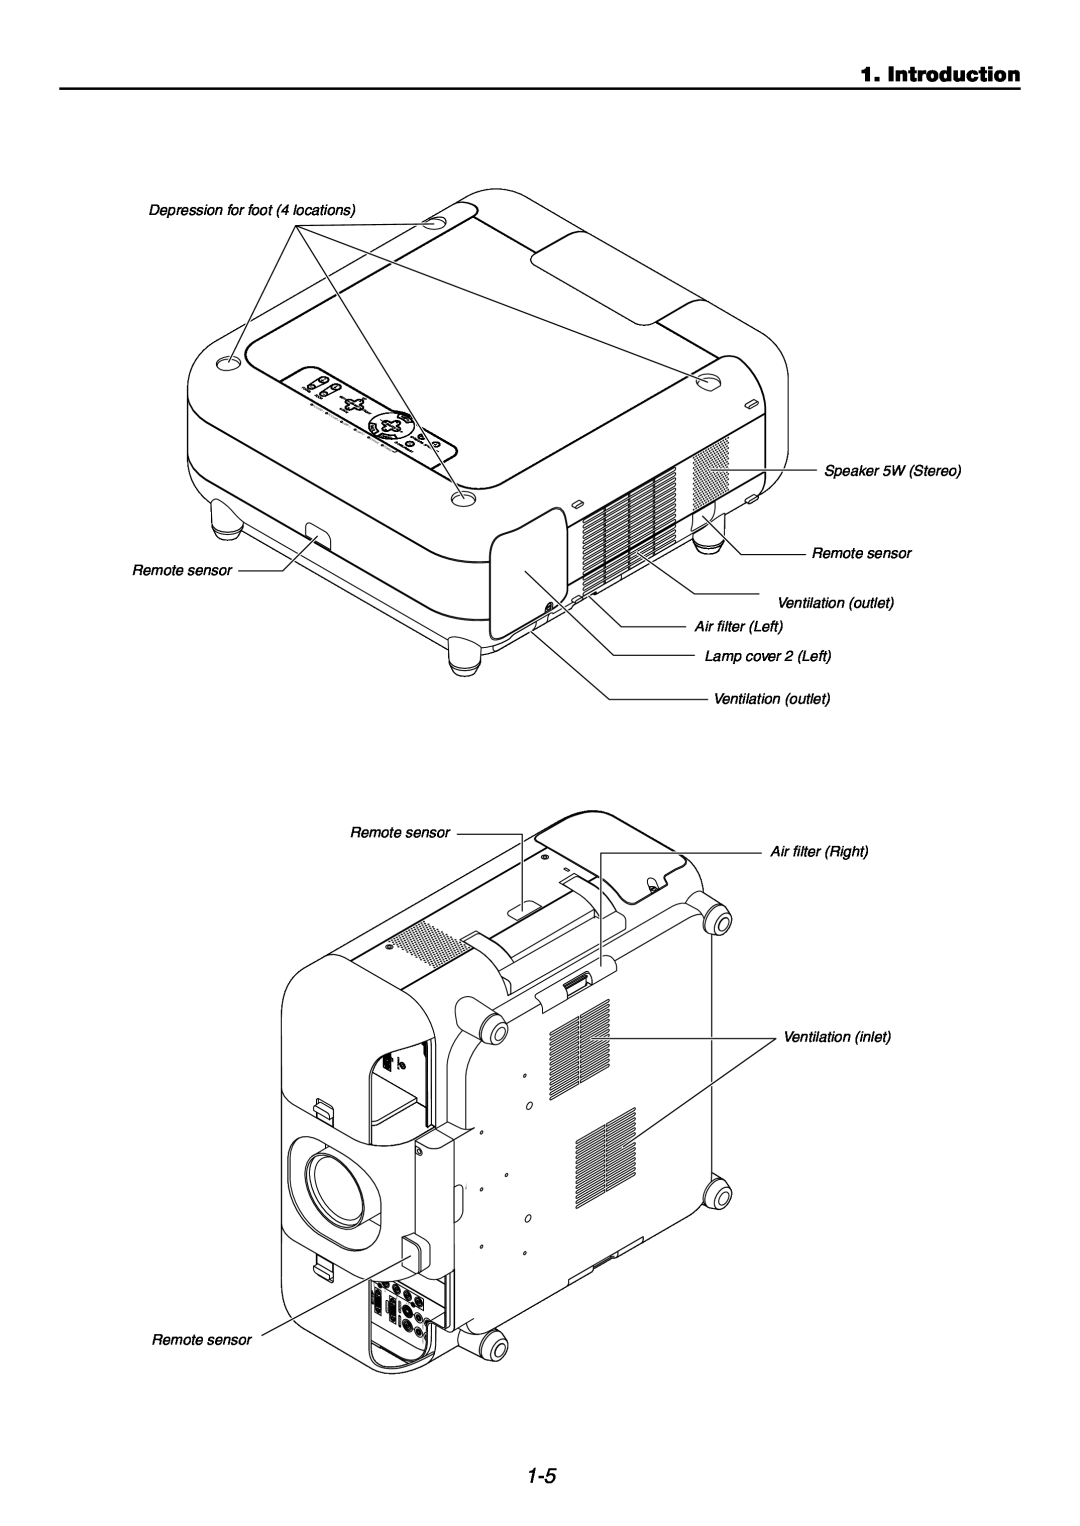 NEC GT6000 user manual Introduction, Depression for foot 4 locations 